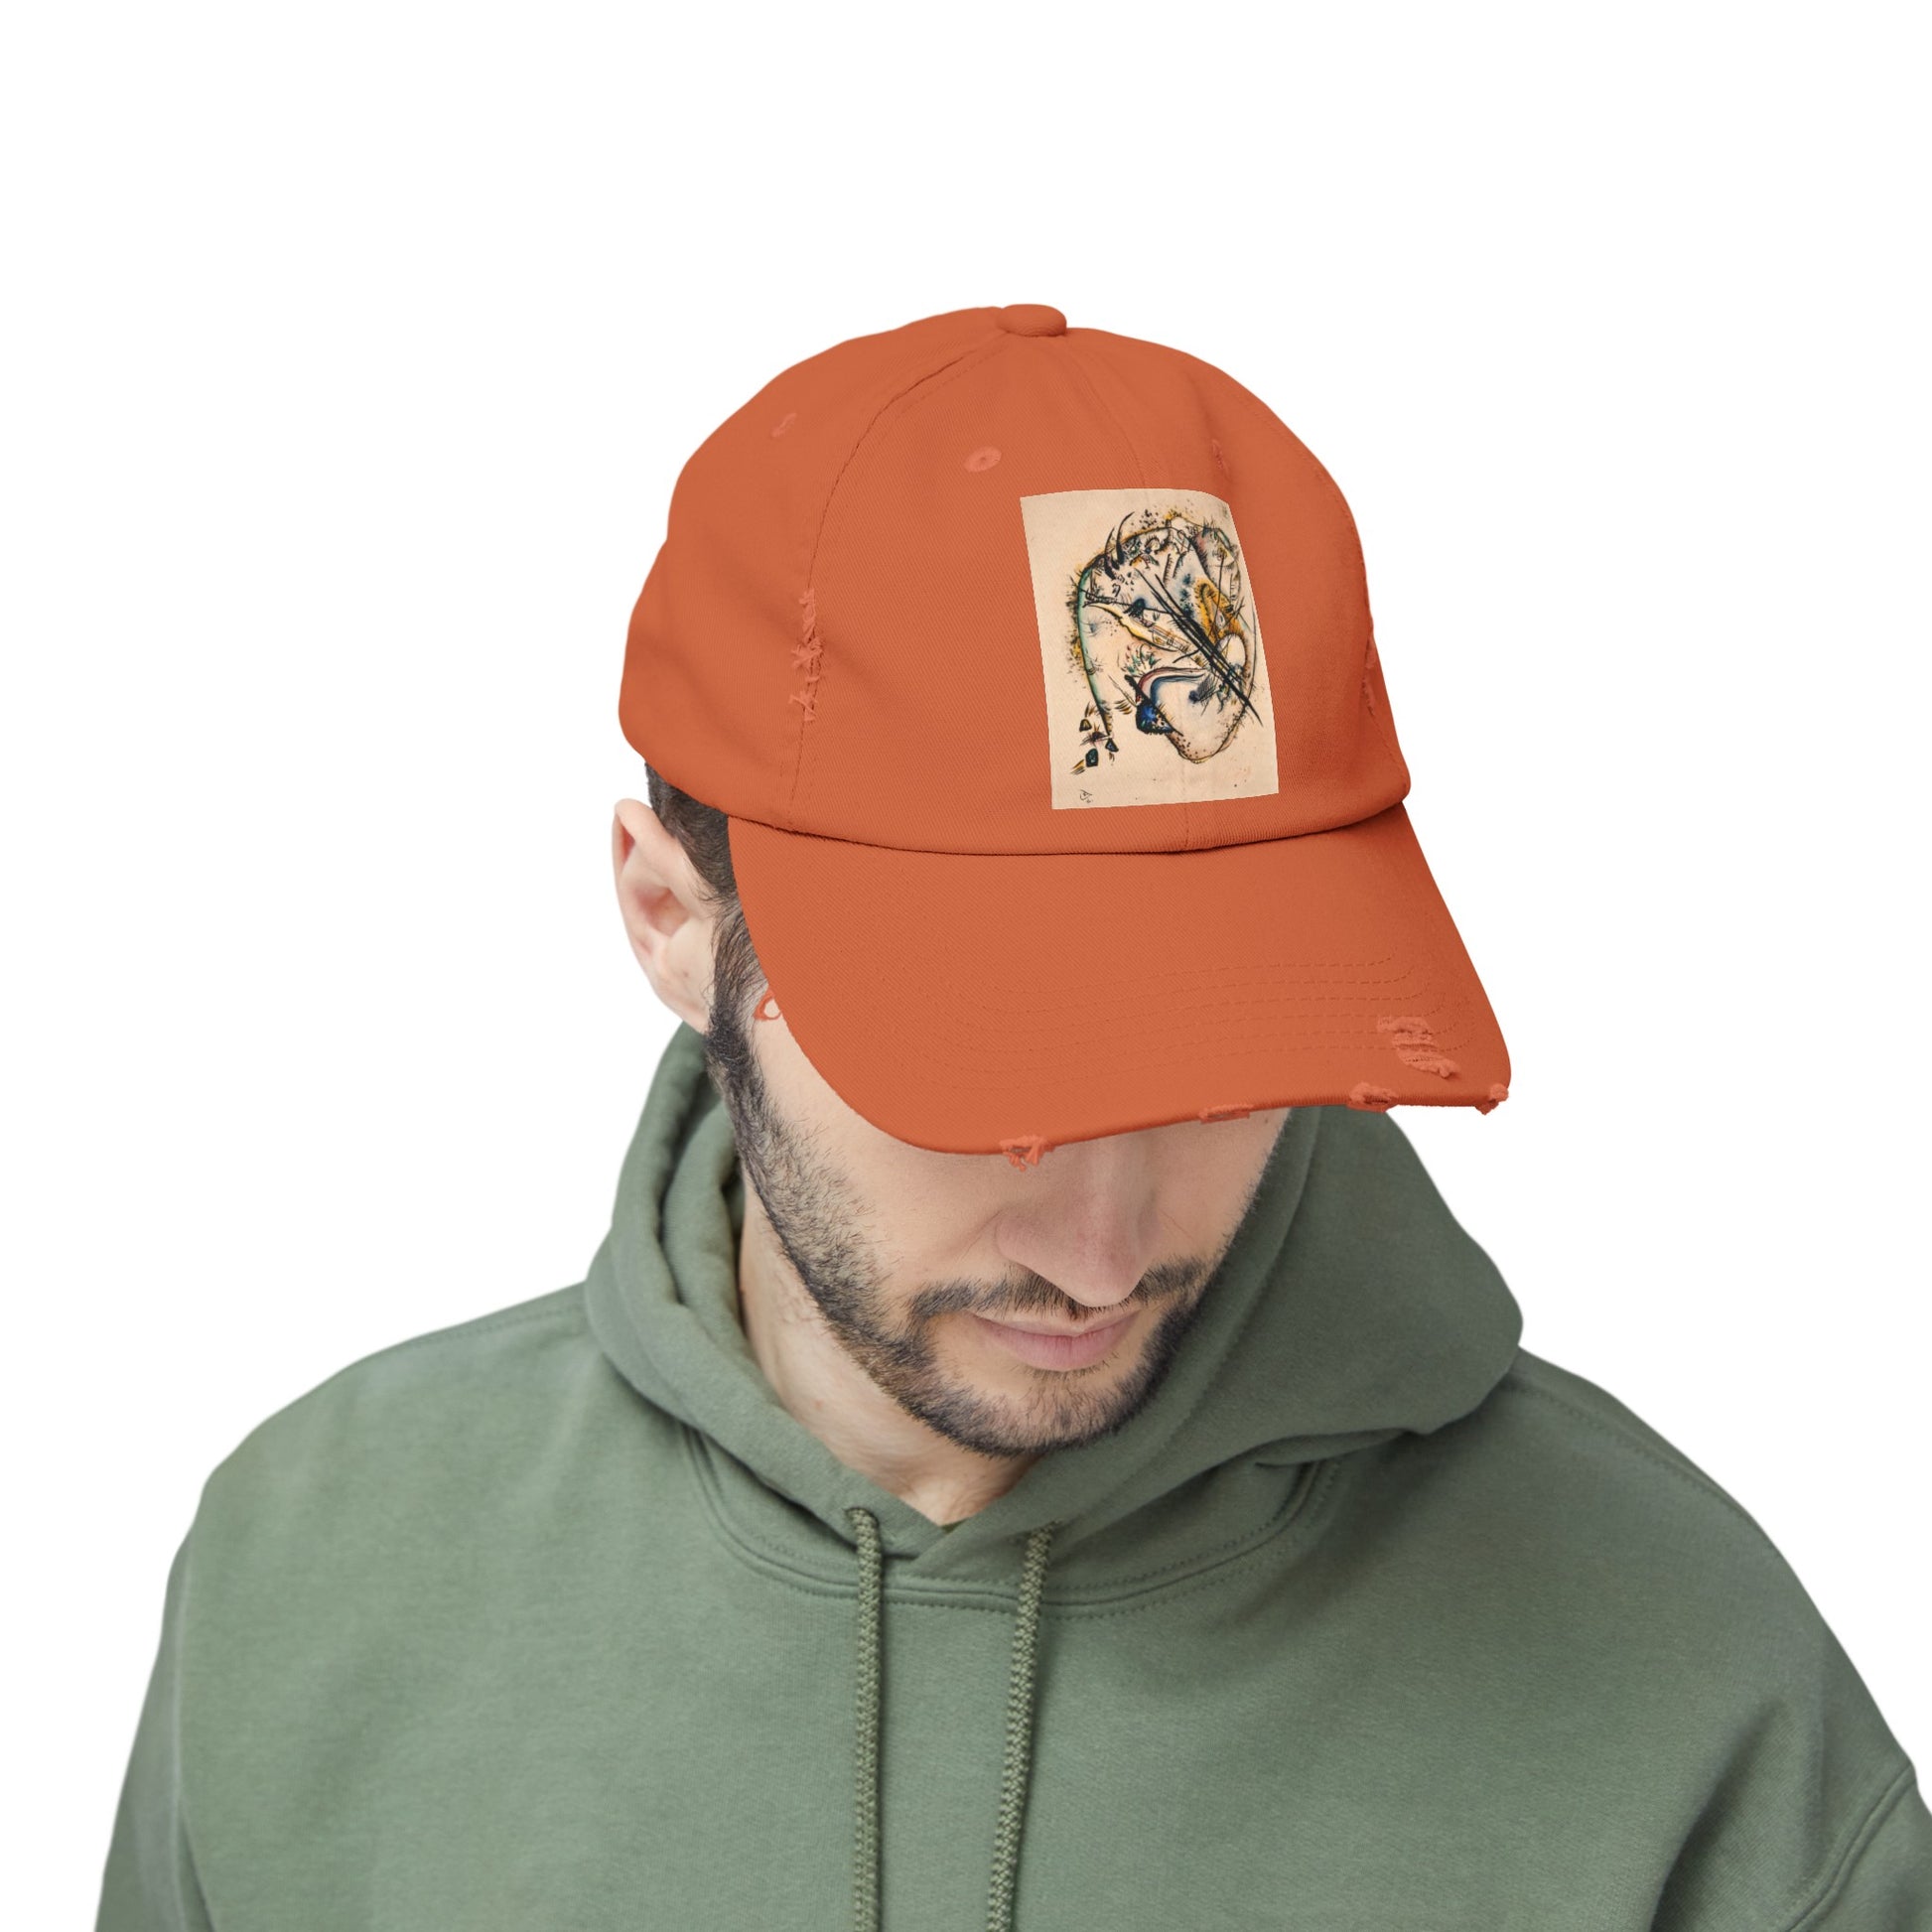 a man wearing an orange hat with a picture of a tiger on it